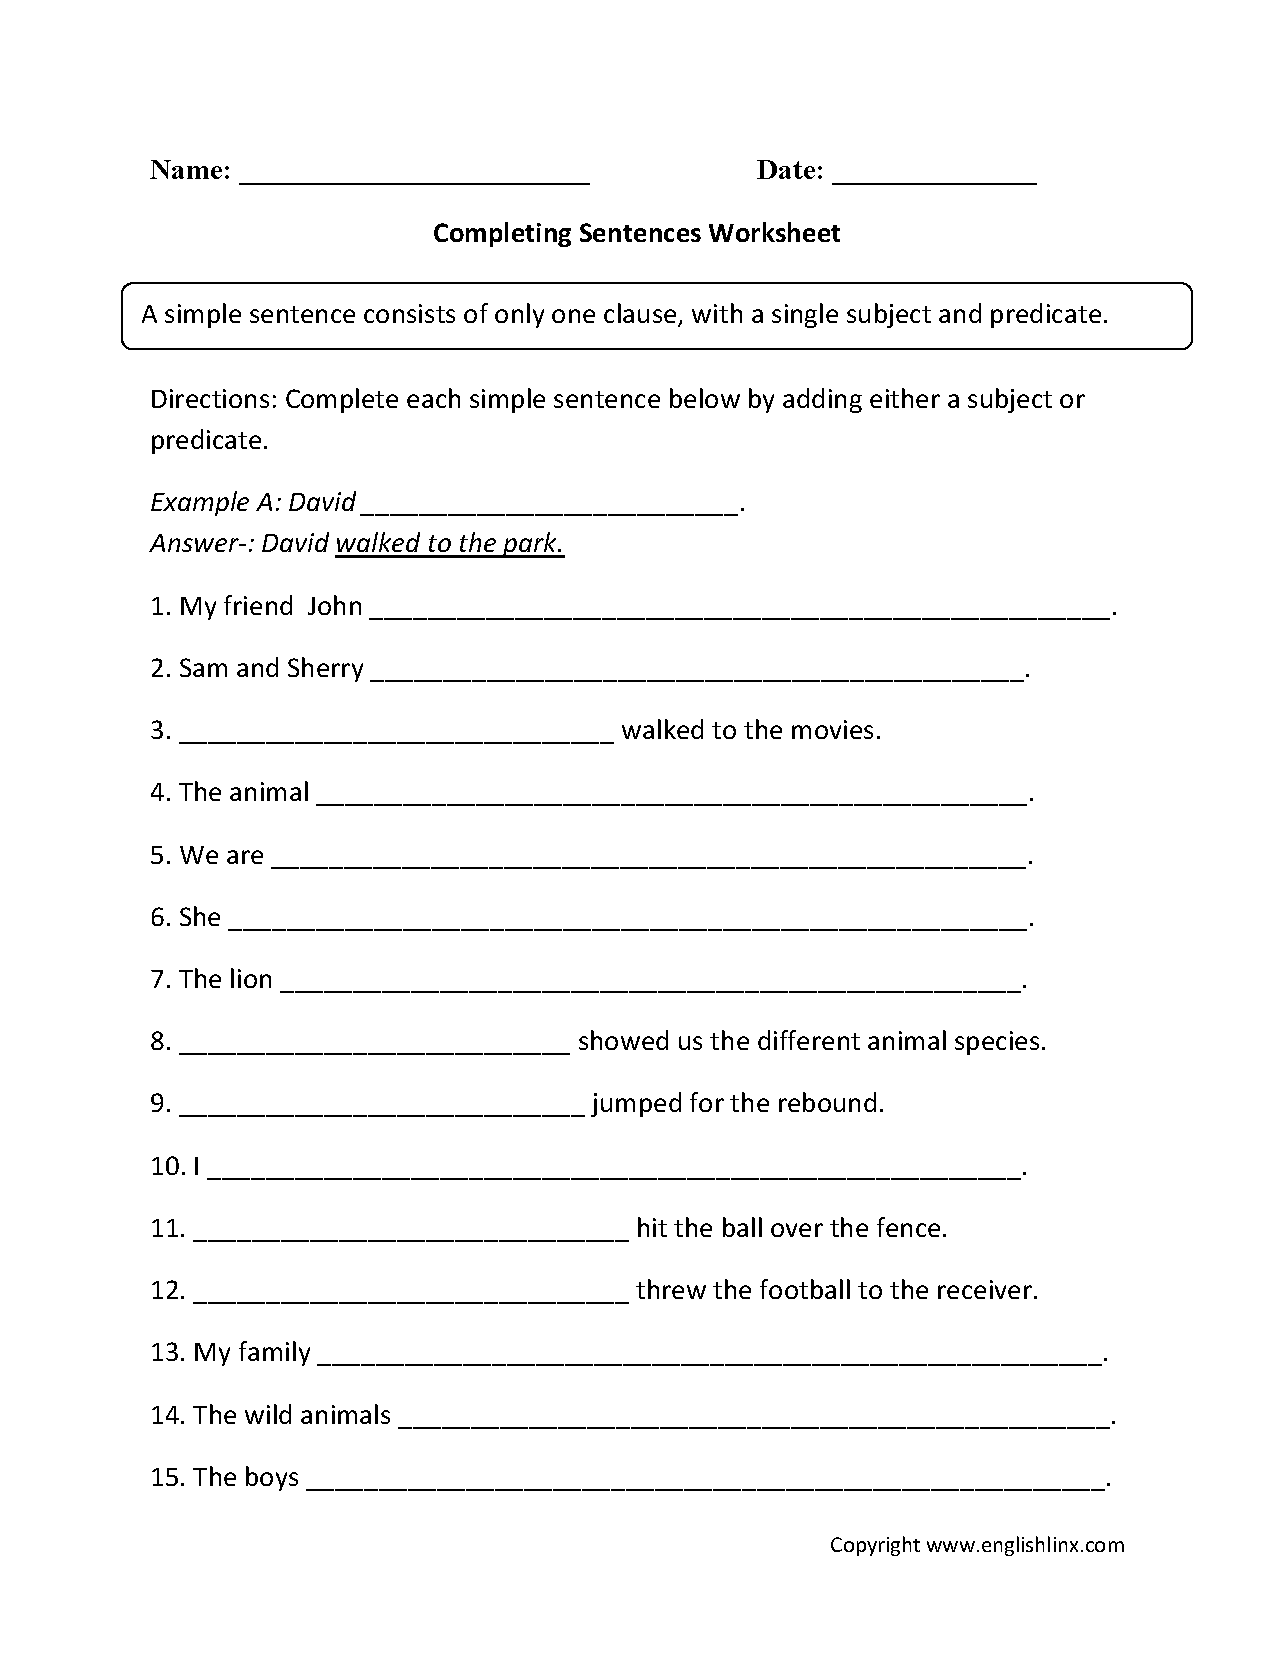 pin-by-anne-gantner-on-primary-the-daily-5-types-of-sentences-worksheet-types-of-sentences